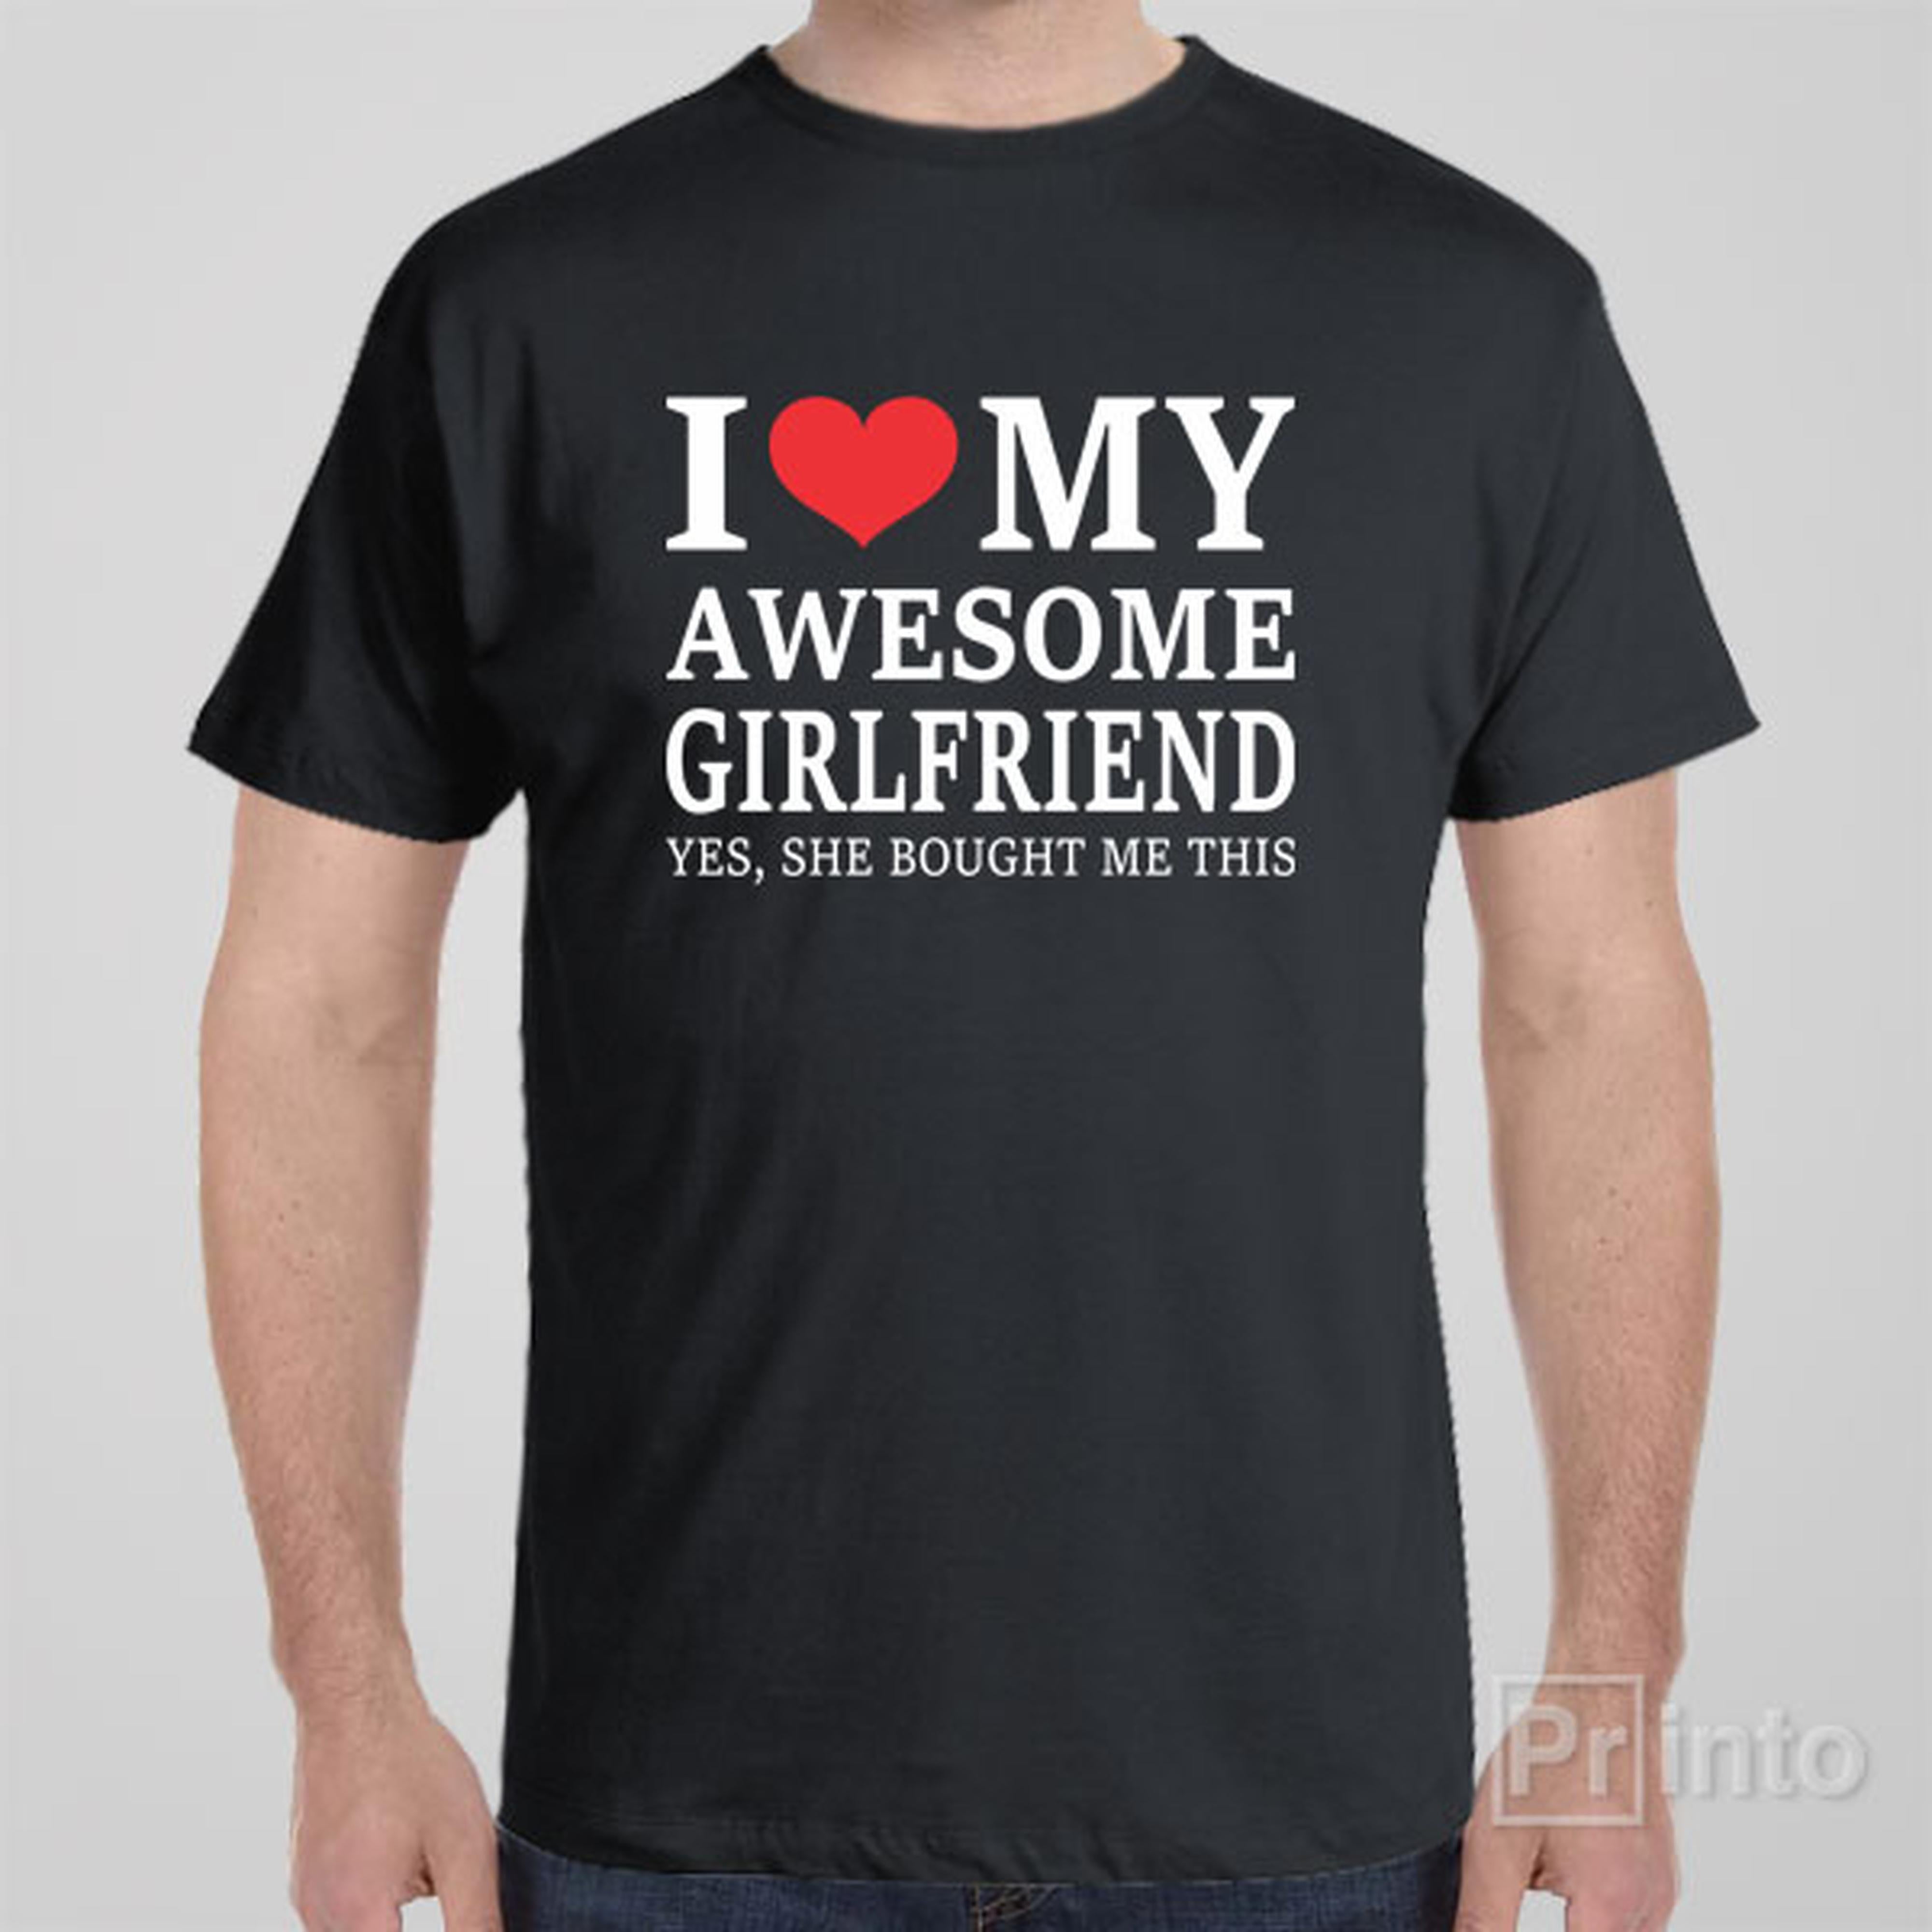 i-love-my-awesome-girlfriend-t-shirt